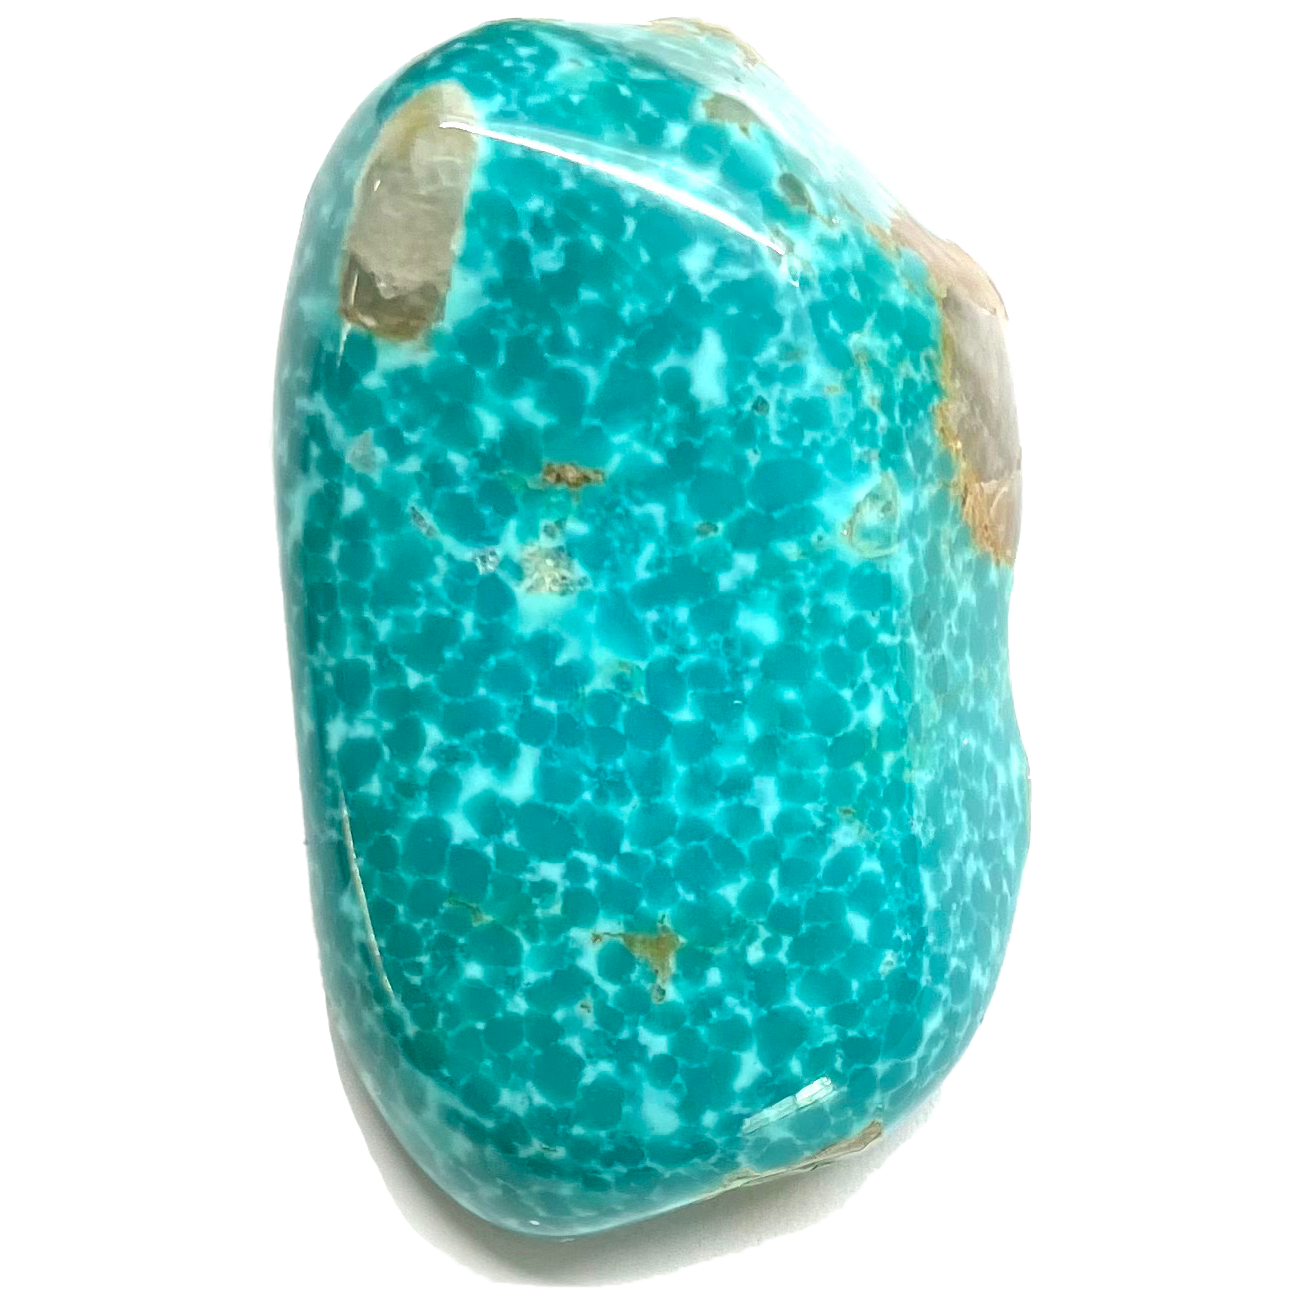 A tumbled turquoise stone.  The stone is spotted blue-green with white quartz inclusions.